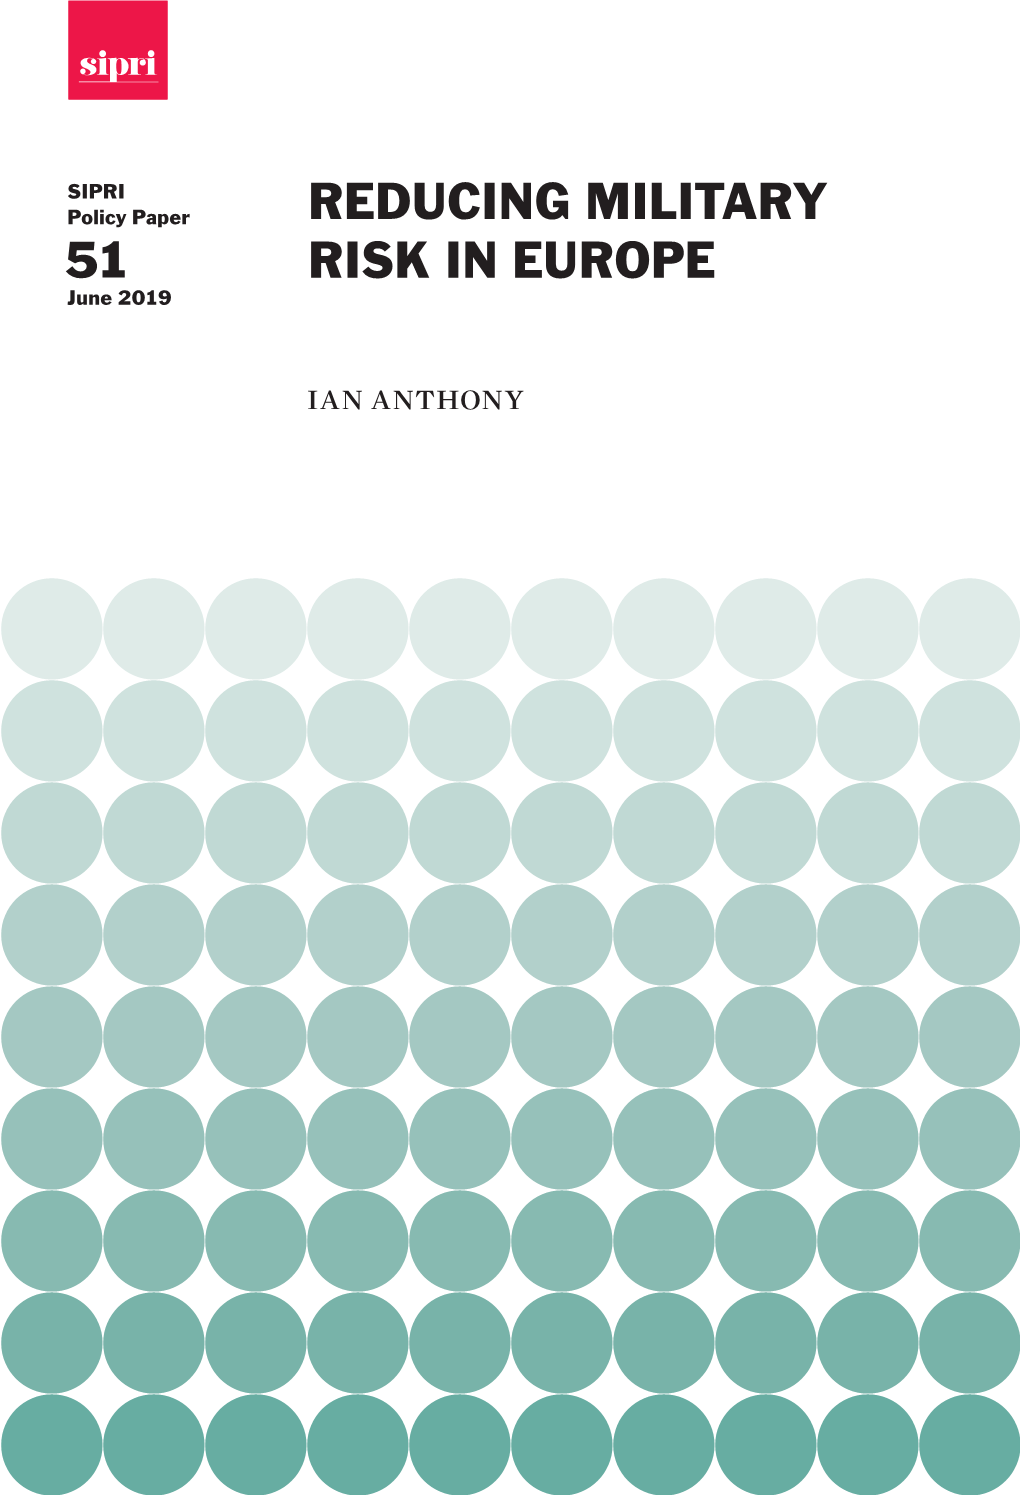 SIPRI Policy Paper No. 51: Reducing Military Risk in Europe